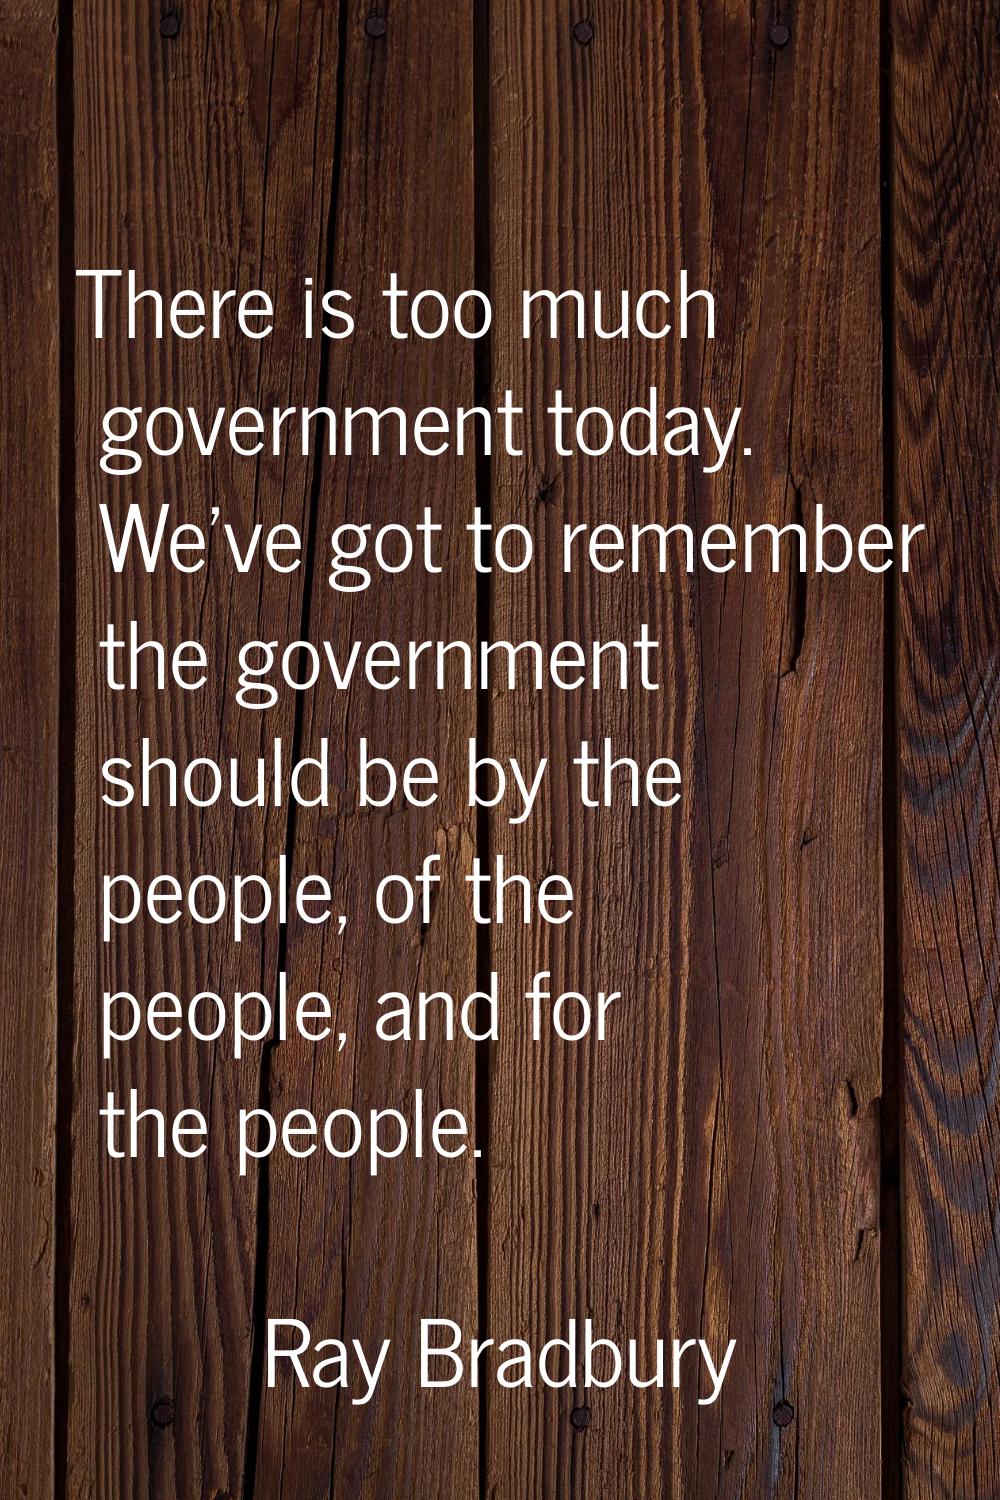 There is too much government today. We've got to remember the government should be by the people, o